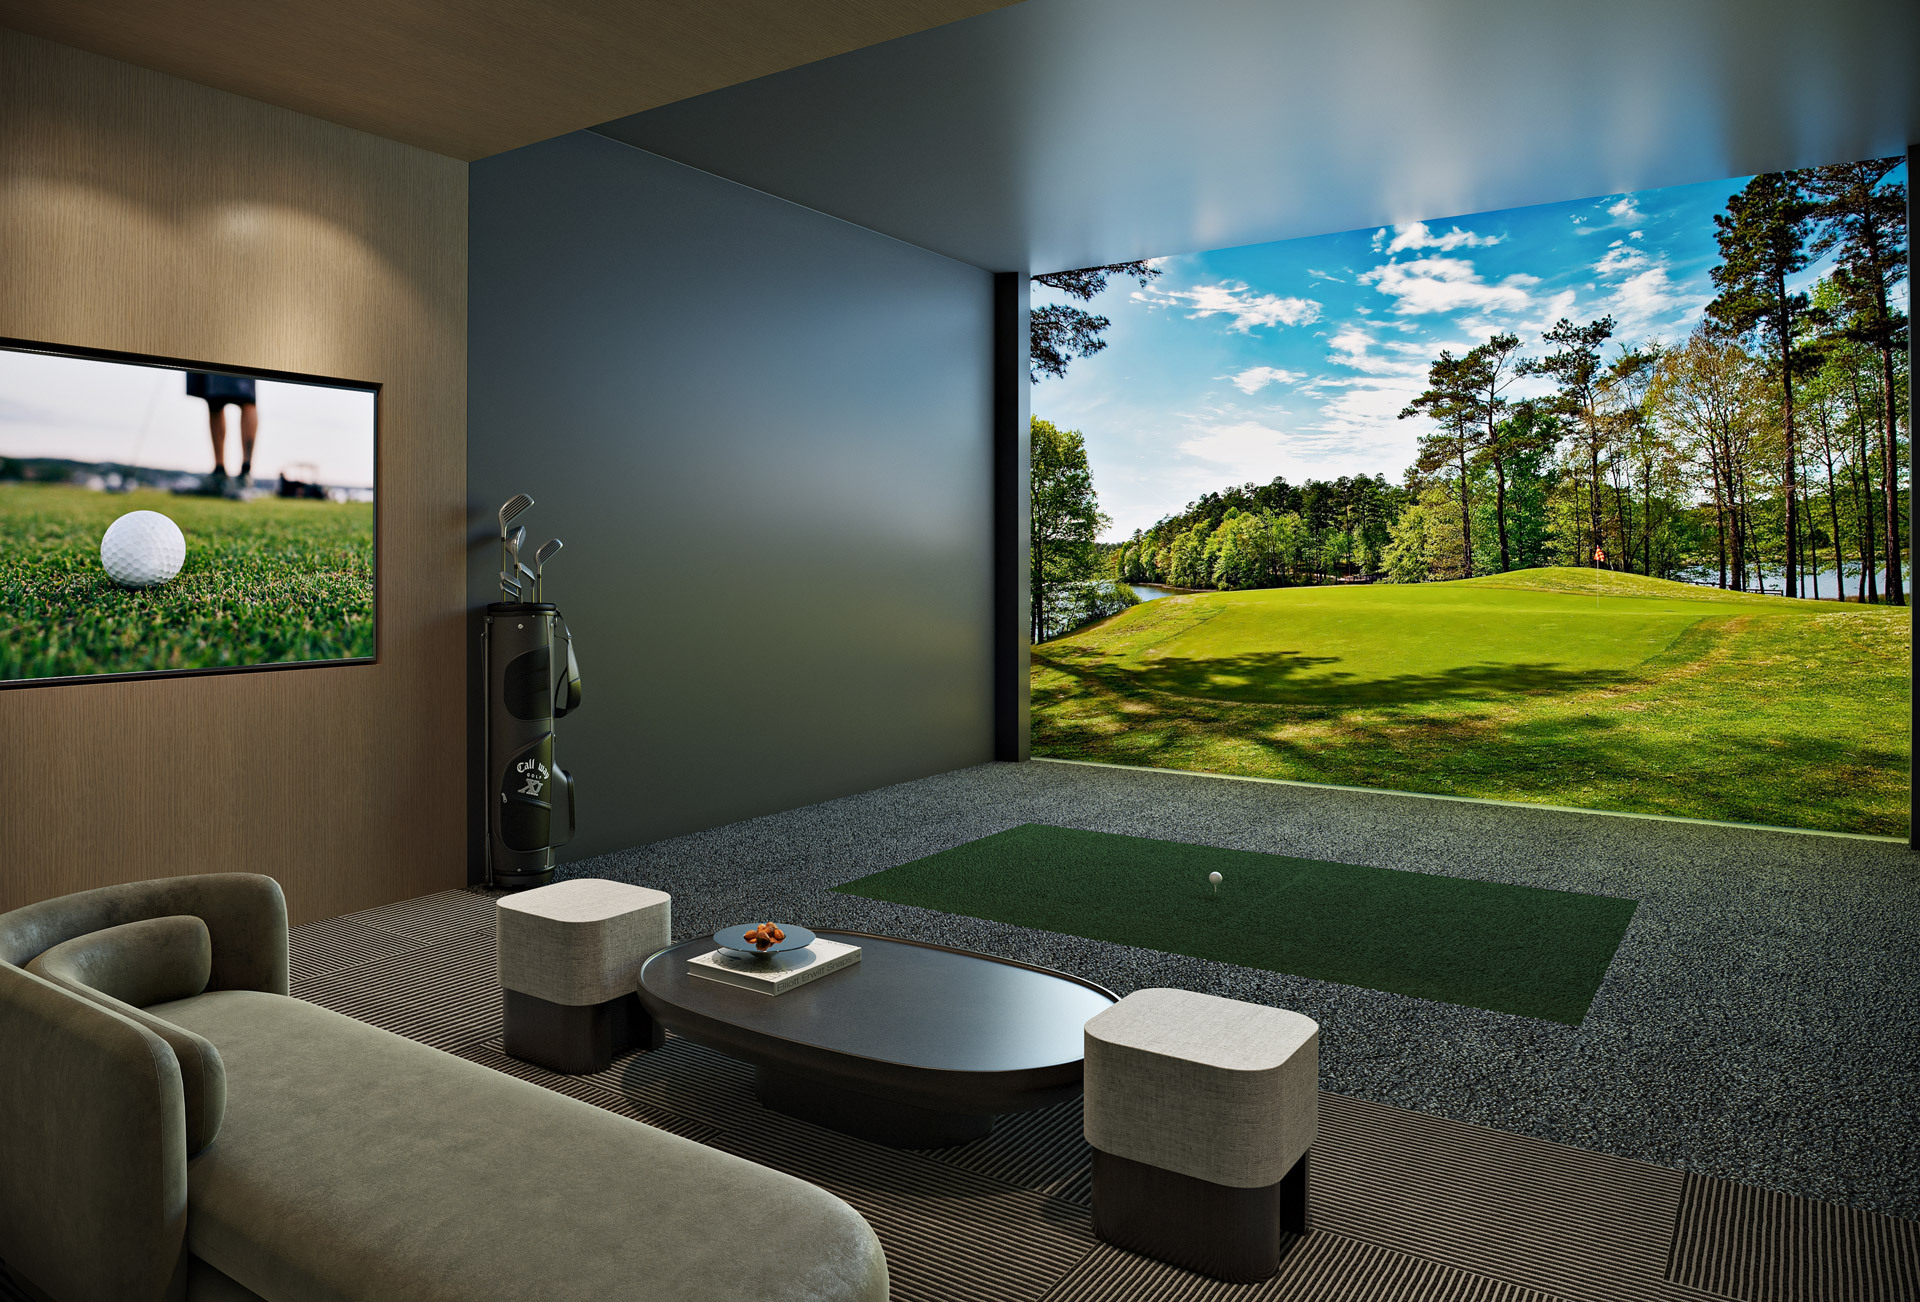 Golf simulator bay at Forma Miami luxury residences. Private room with lounge area, projector screen, and turf tee box.